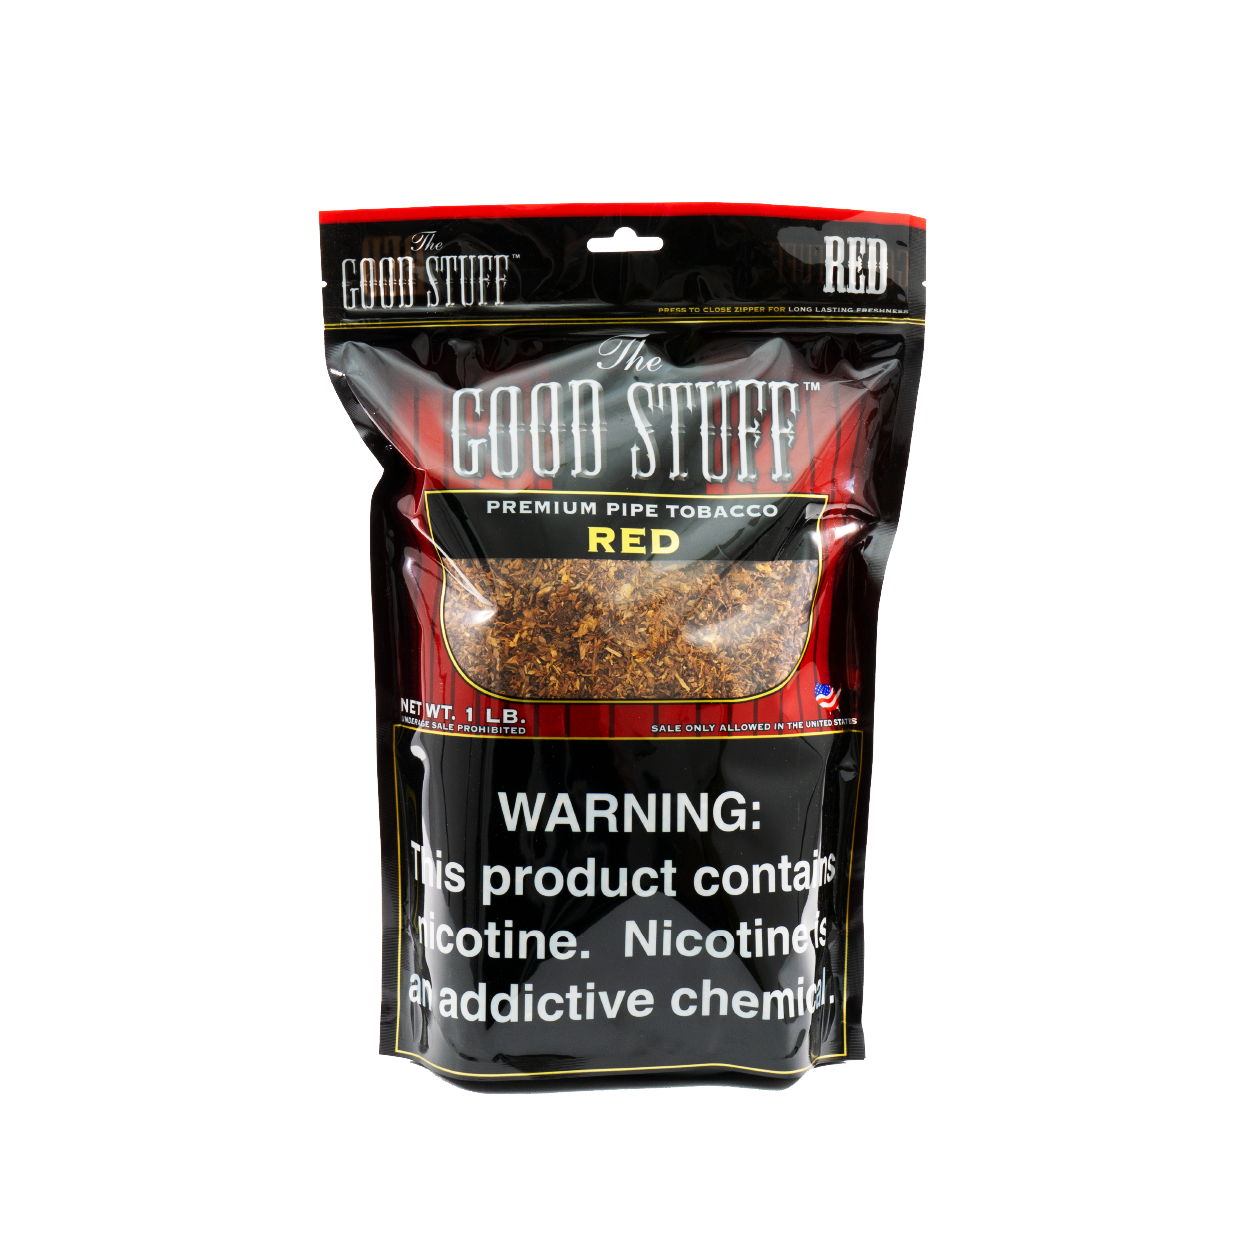 https://www.privateertobacco.com/wp-content/uploads/2022/03/Products-The-Good-Stuff_red-1-lb-1.png